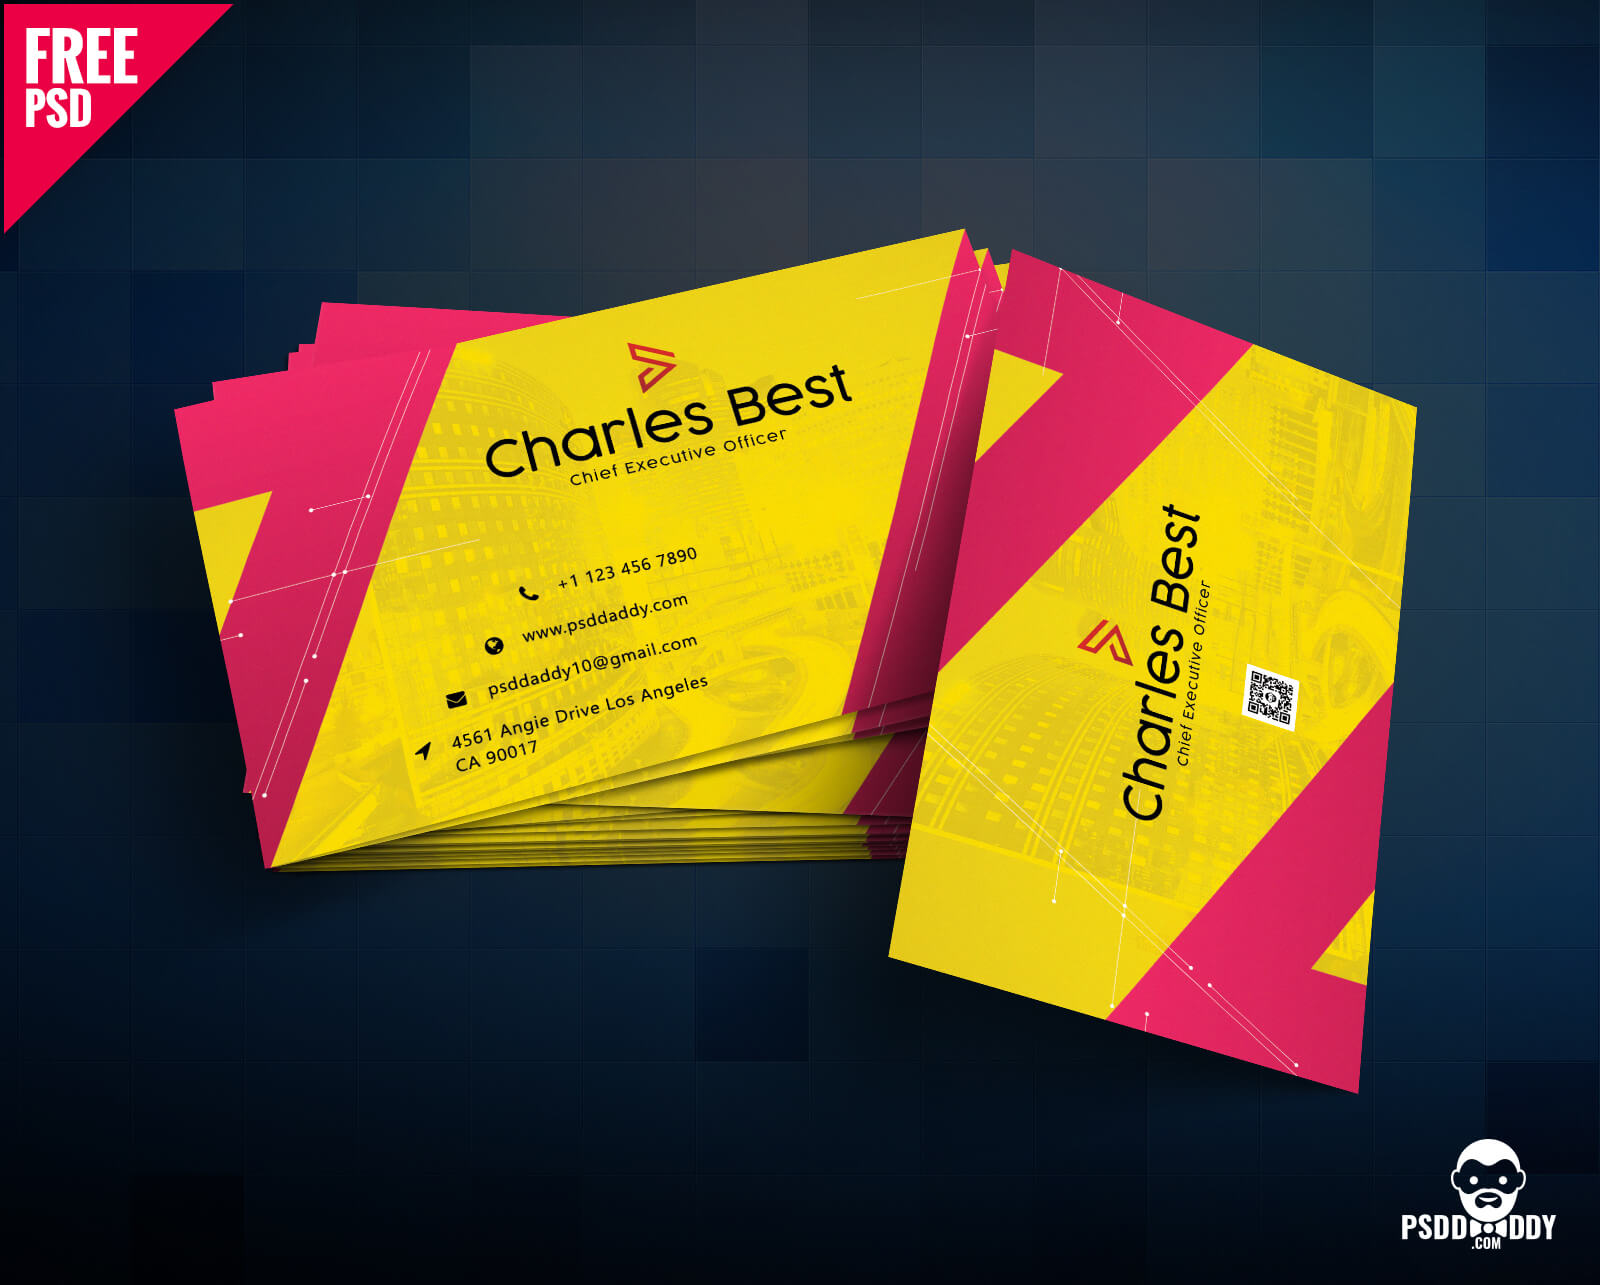 Download] Creative Business Card Free Psd | Psddaddy In Visiting Card Templates For Photoshop